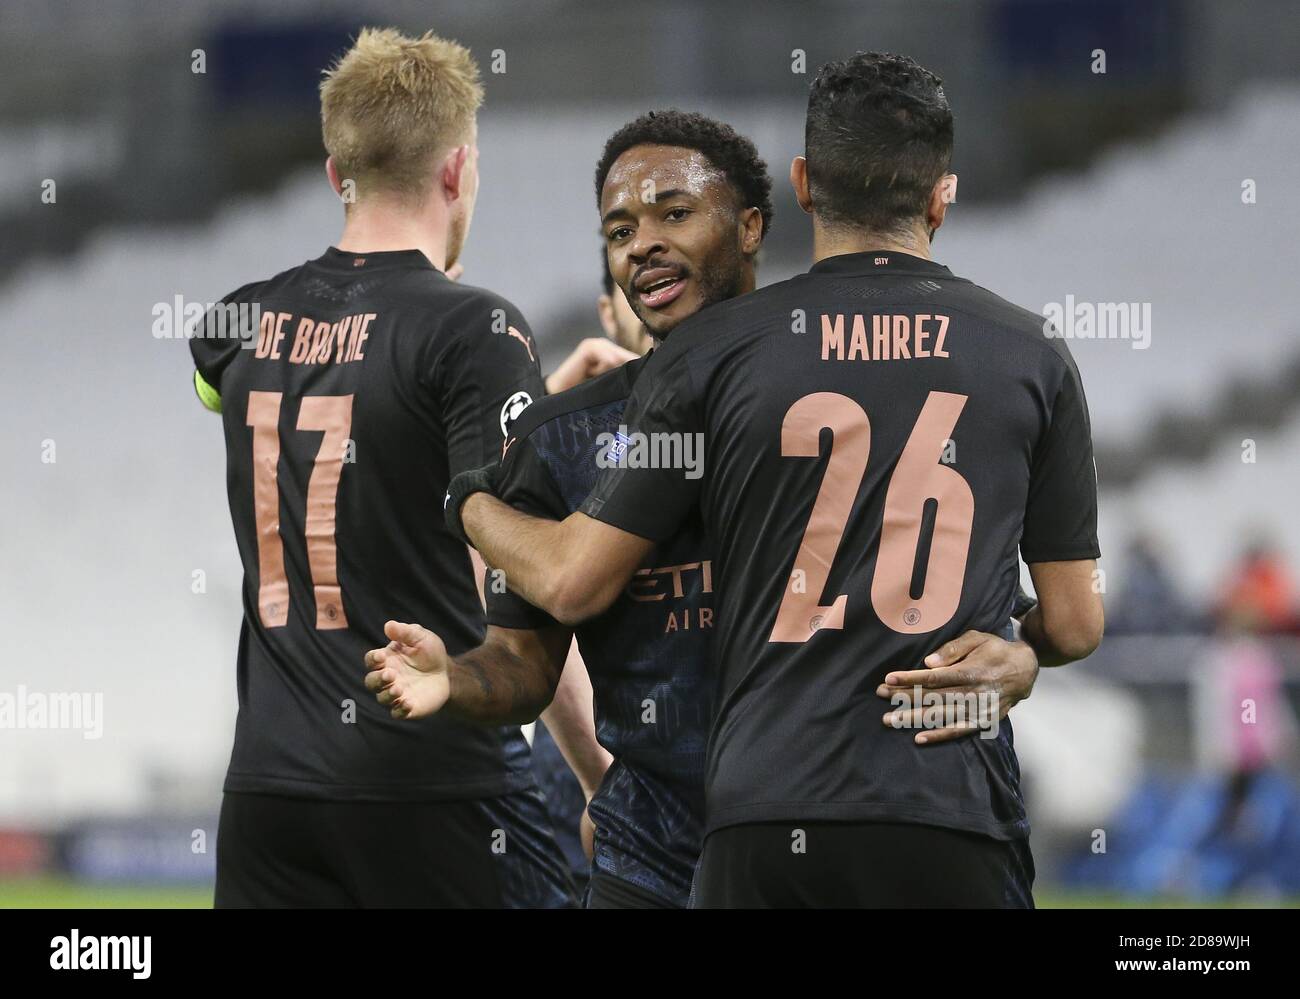 Kevin de Bruyne of Manchester City celebrates his goal with Raheem Sterling (center), Riyad Mahrez during the UEFA Champions League, Group Stage, Gr C Stock Photo